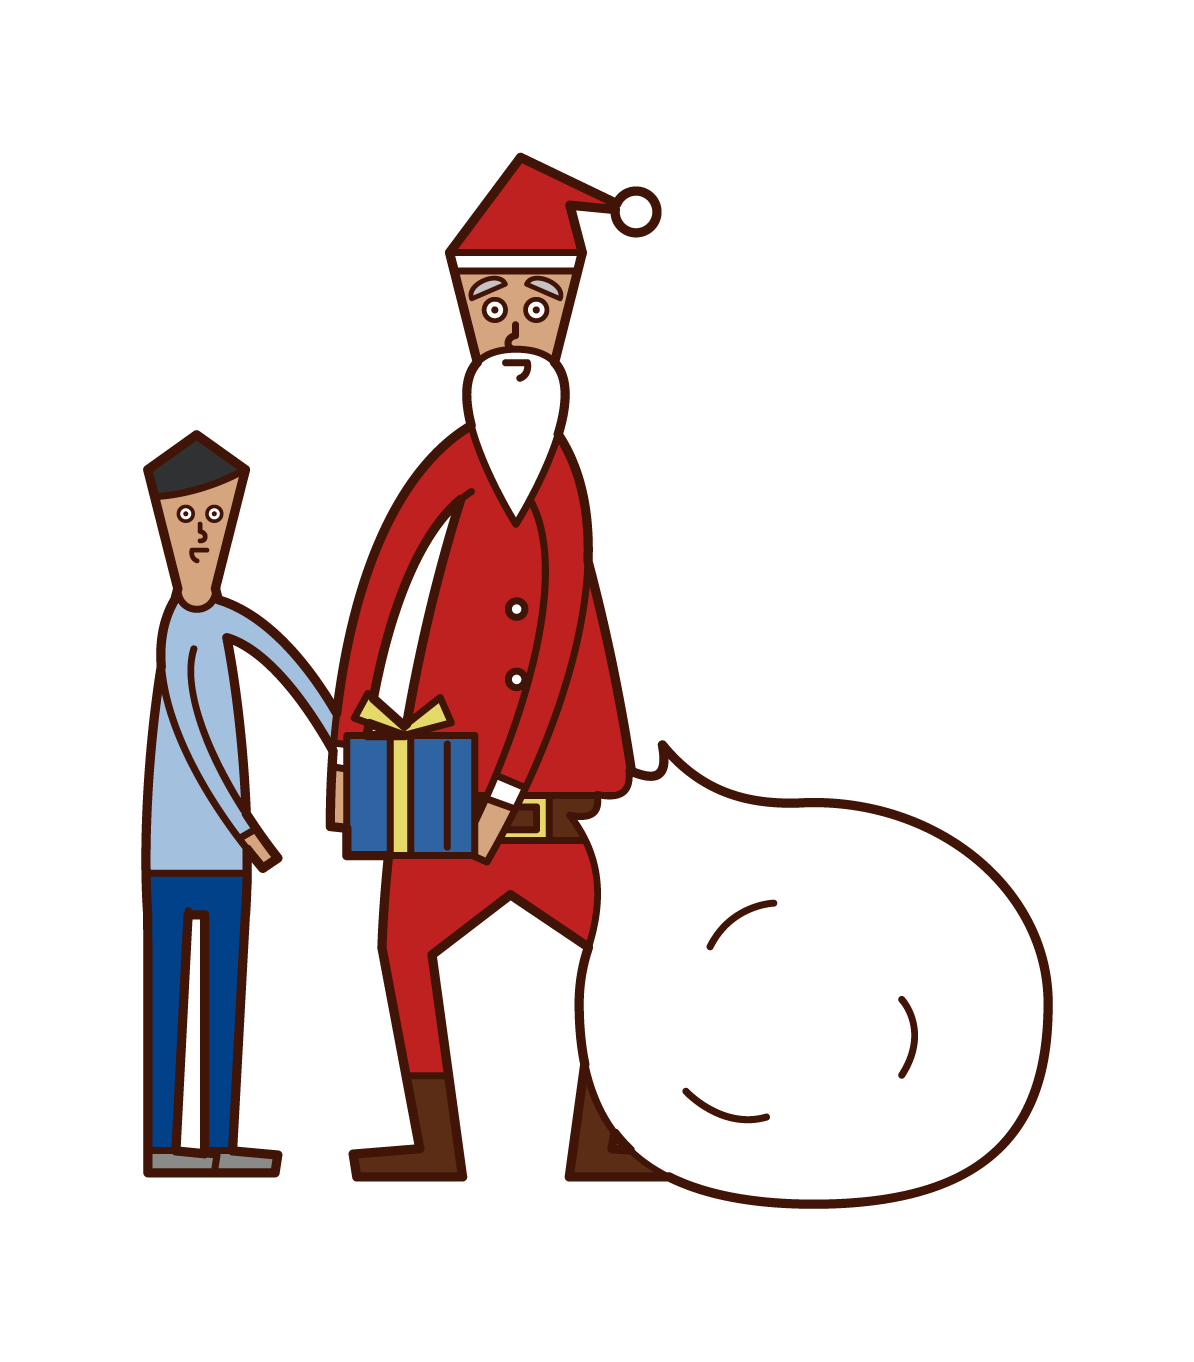 Illustration of Santa Claus giving presents to children